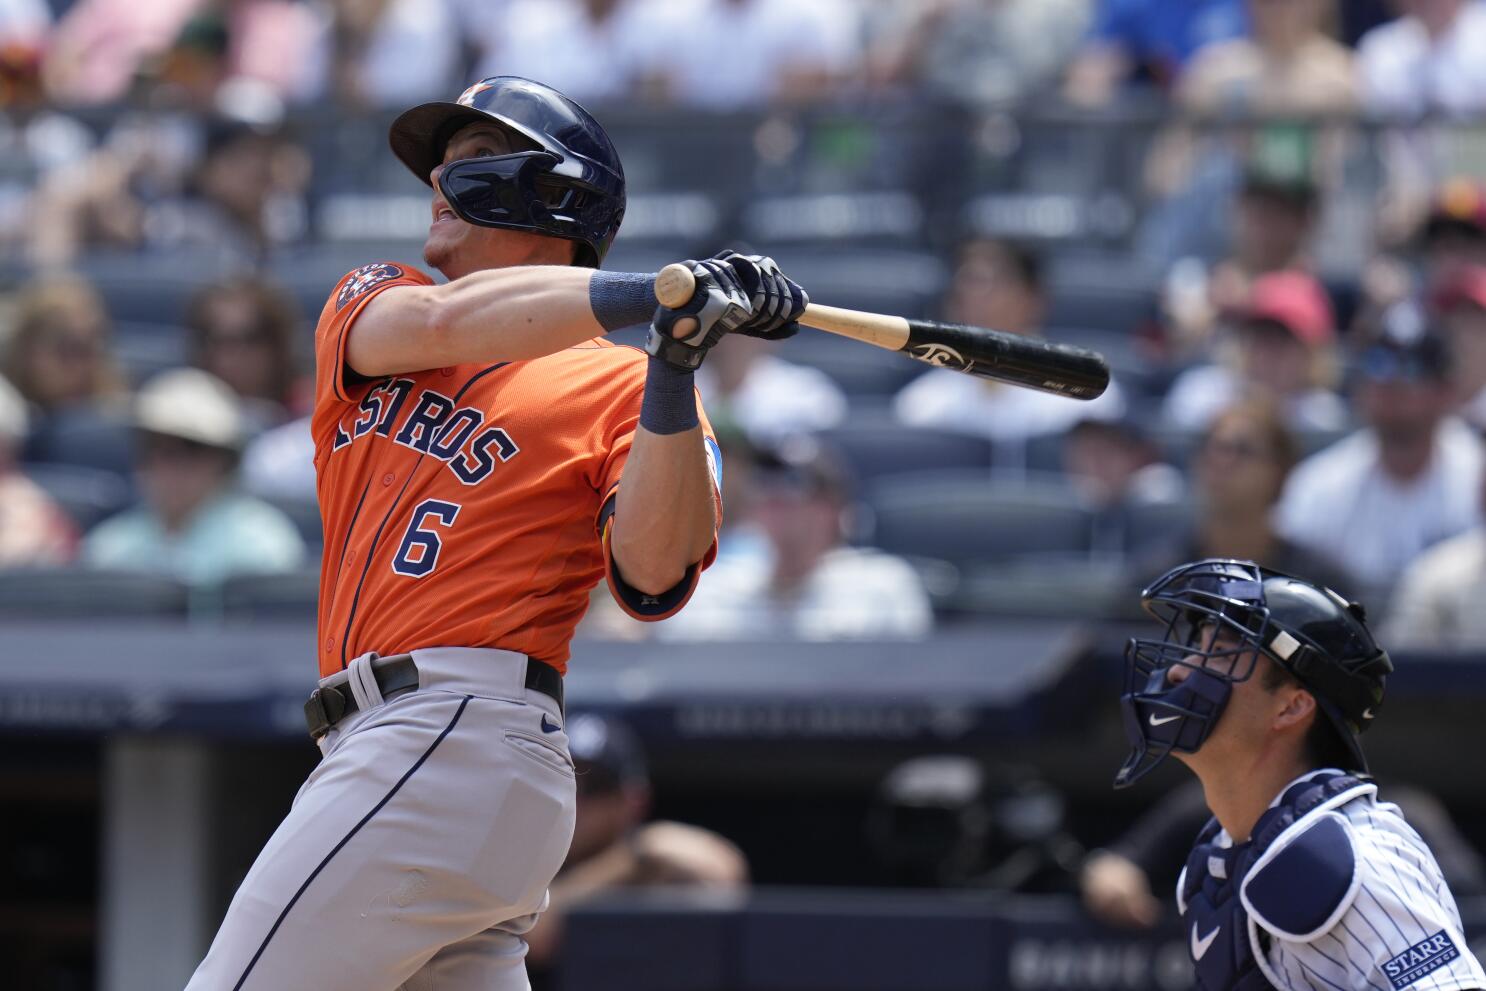 Meyers hits pair of 3-run HRs and Astros go deep 4 times to beat Yankees  9-7 for a 4-game split